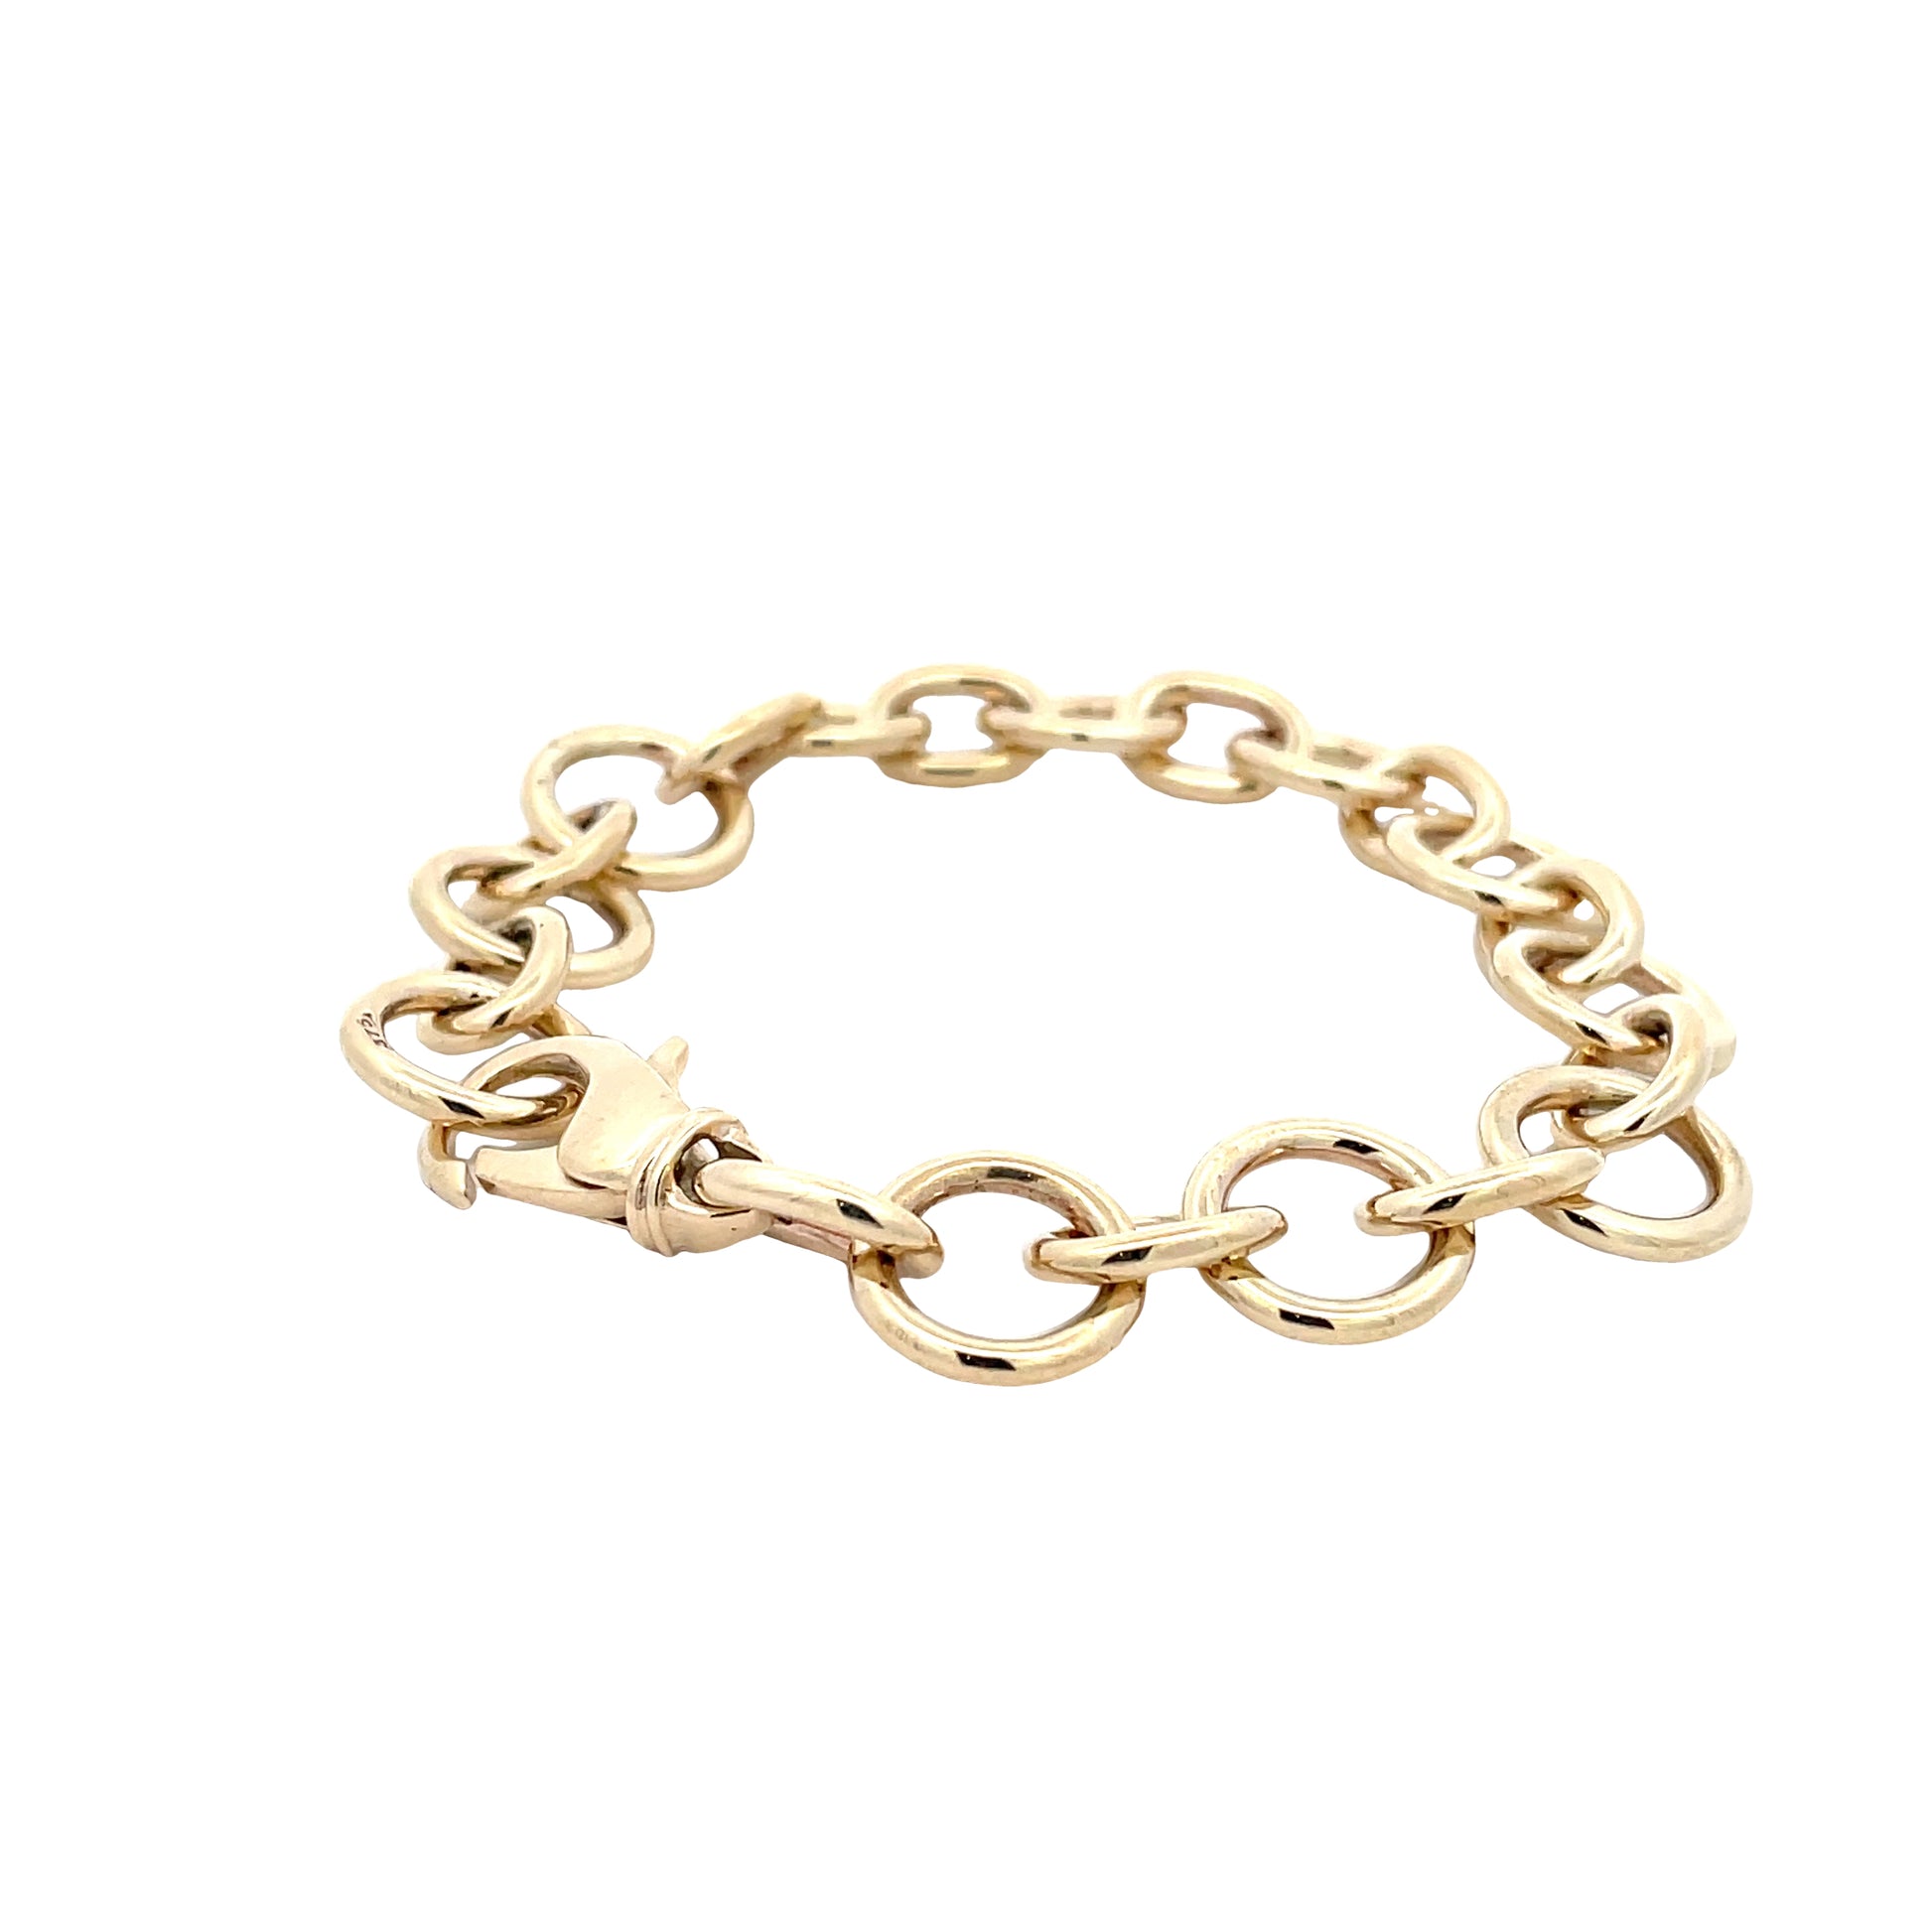 Yellow gold wide link style bracelet  Gardiner Brothers   